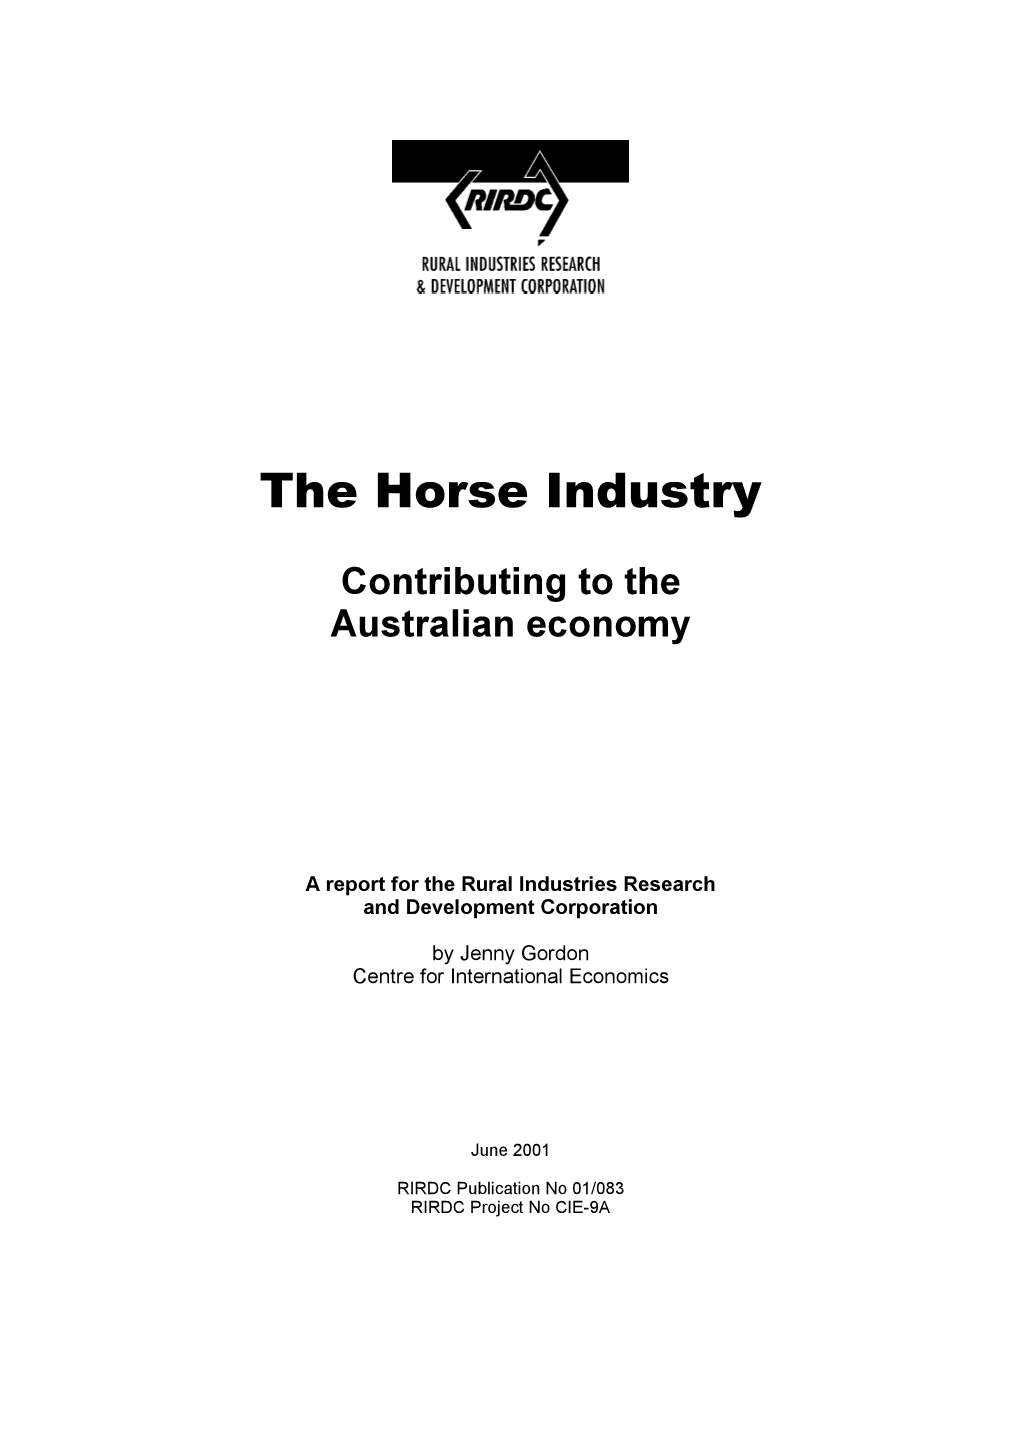 The Horse Industry